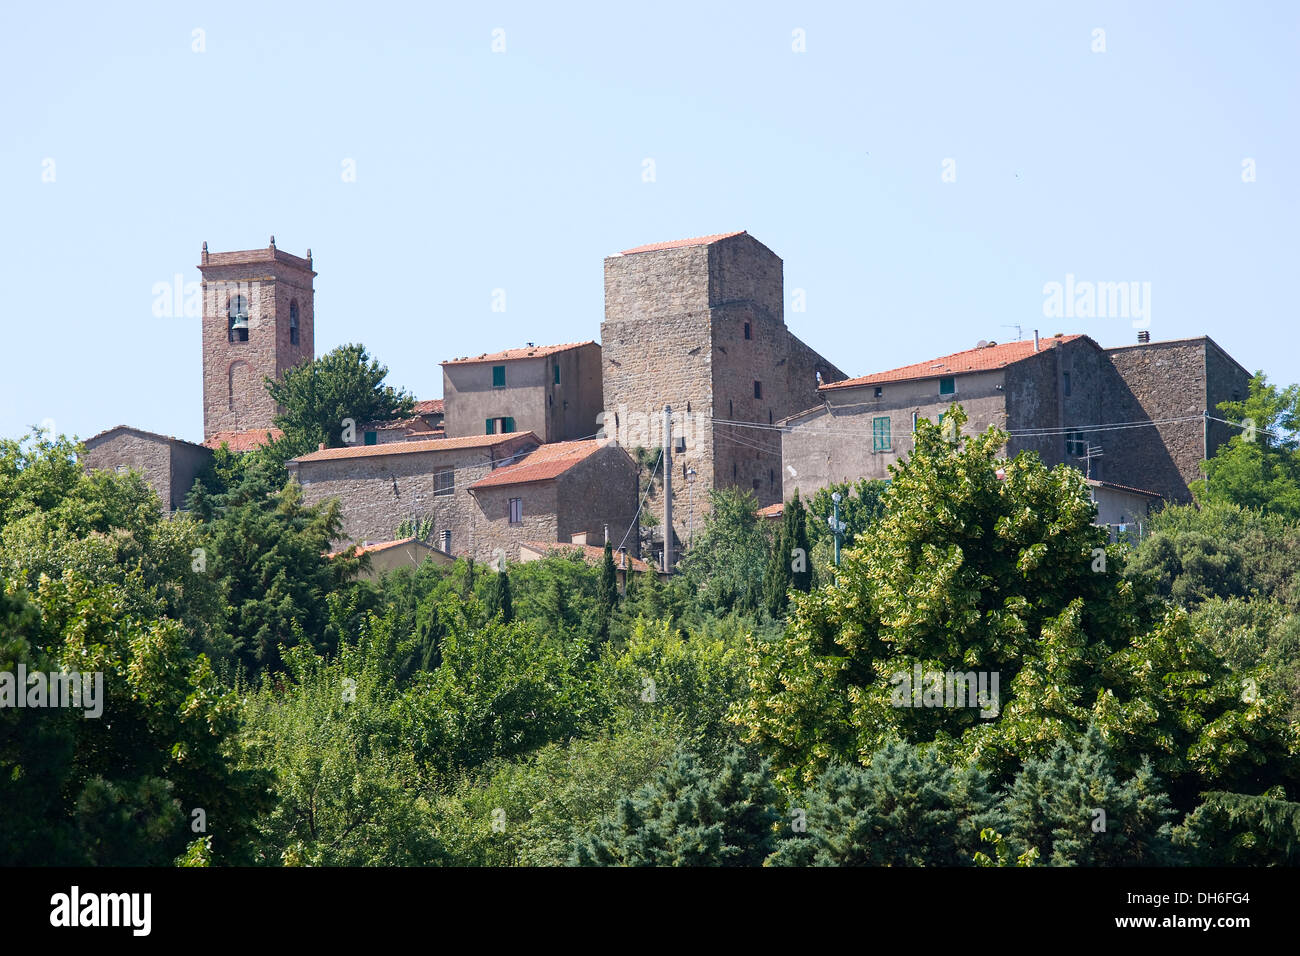 Vetulonia Italy High Resolution Stock Photography and Images - Alamy